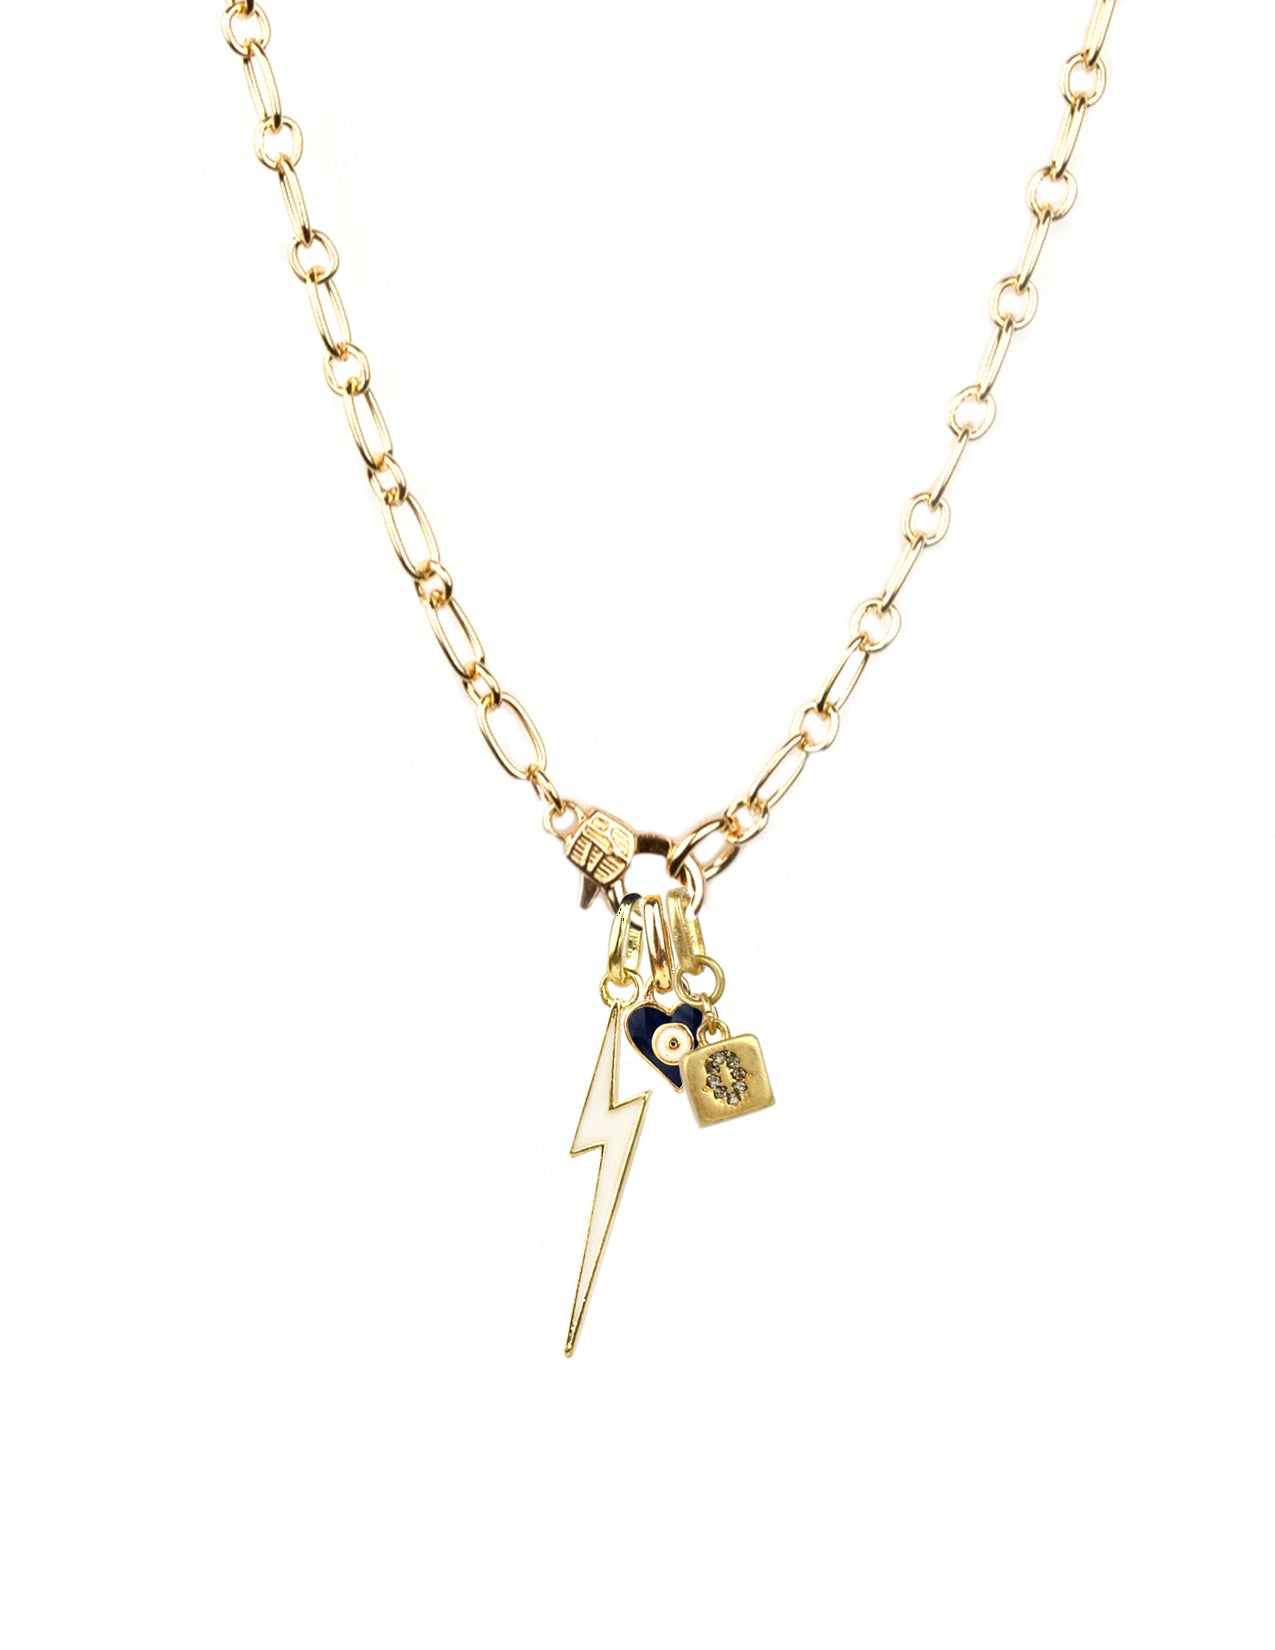 Direct From Graceland Gold Plated TCB Necklace - Graceland Official Store